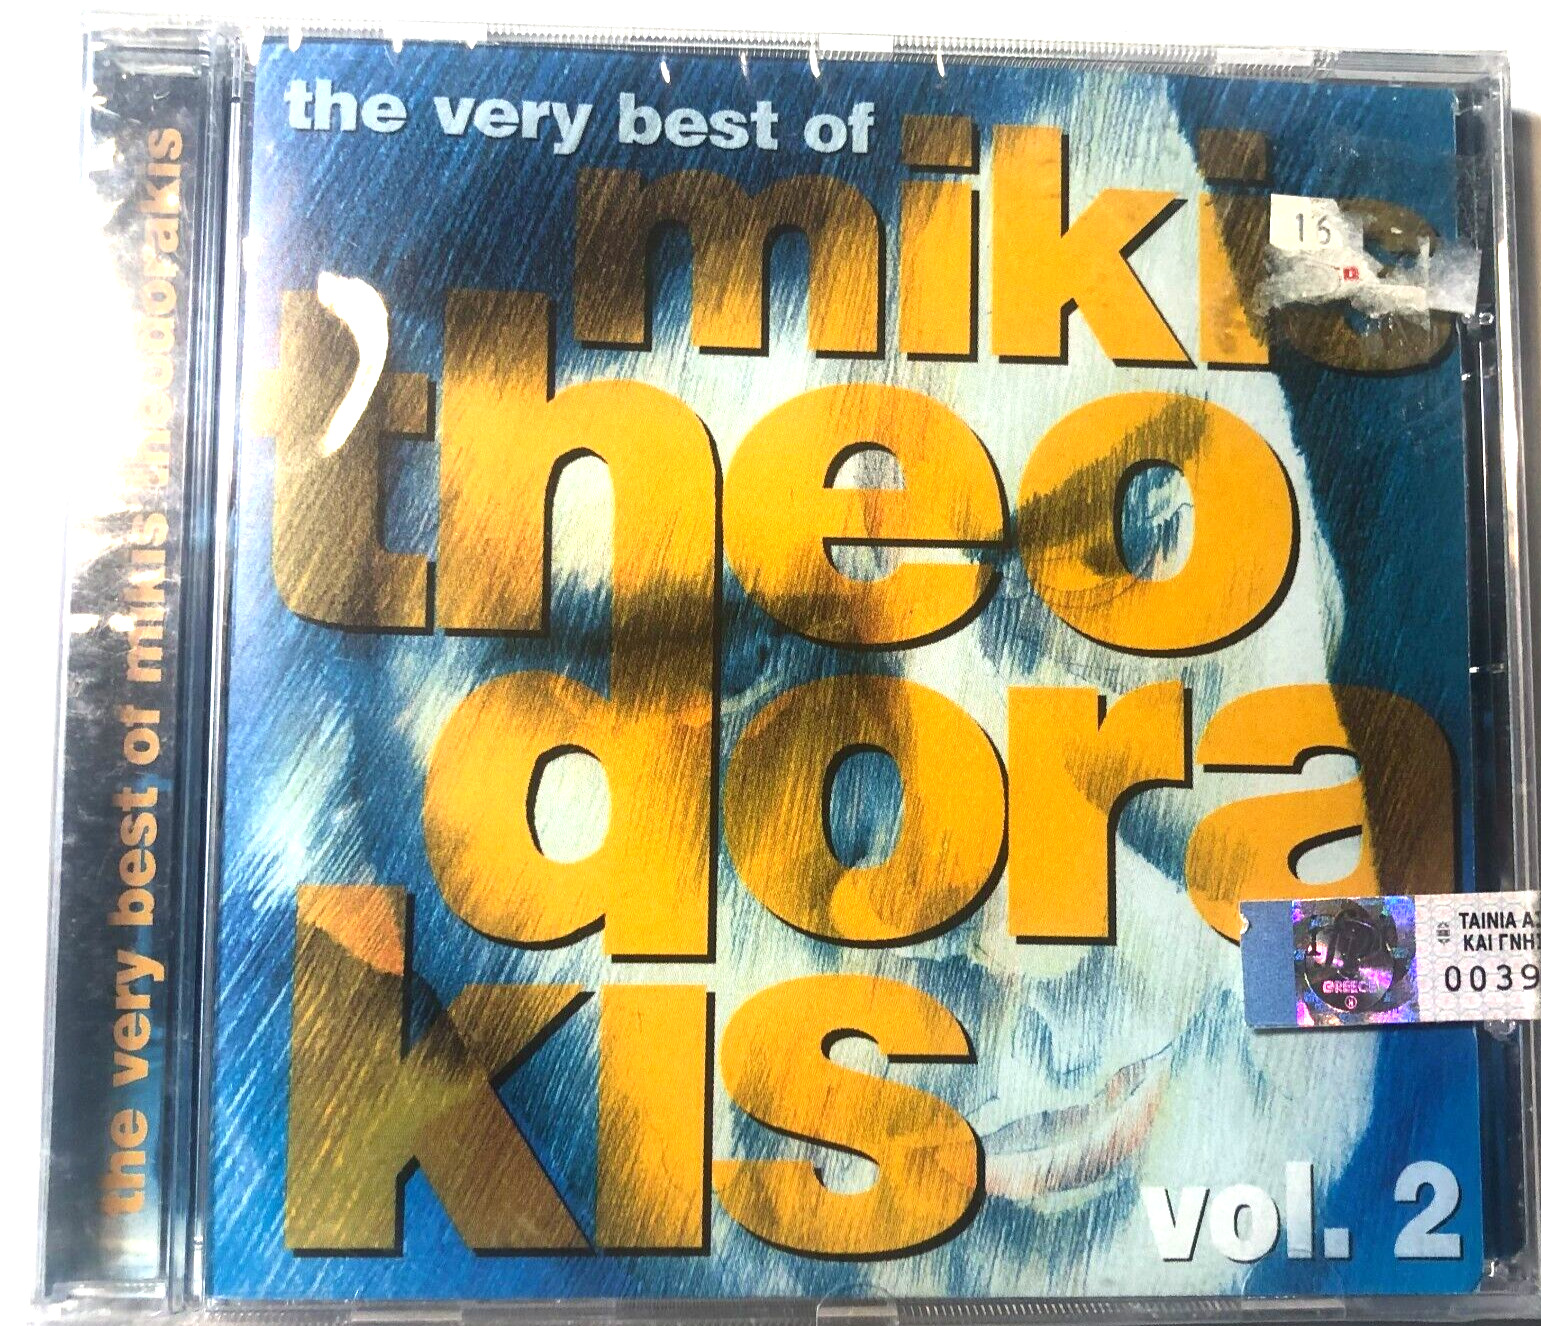 Mikis Theodorakis The Very Best of Vol 2 (CD 1999) New sealed